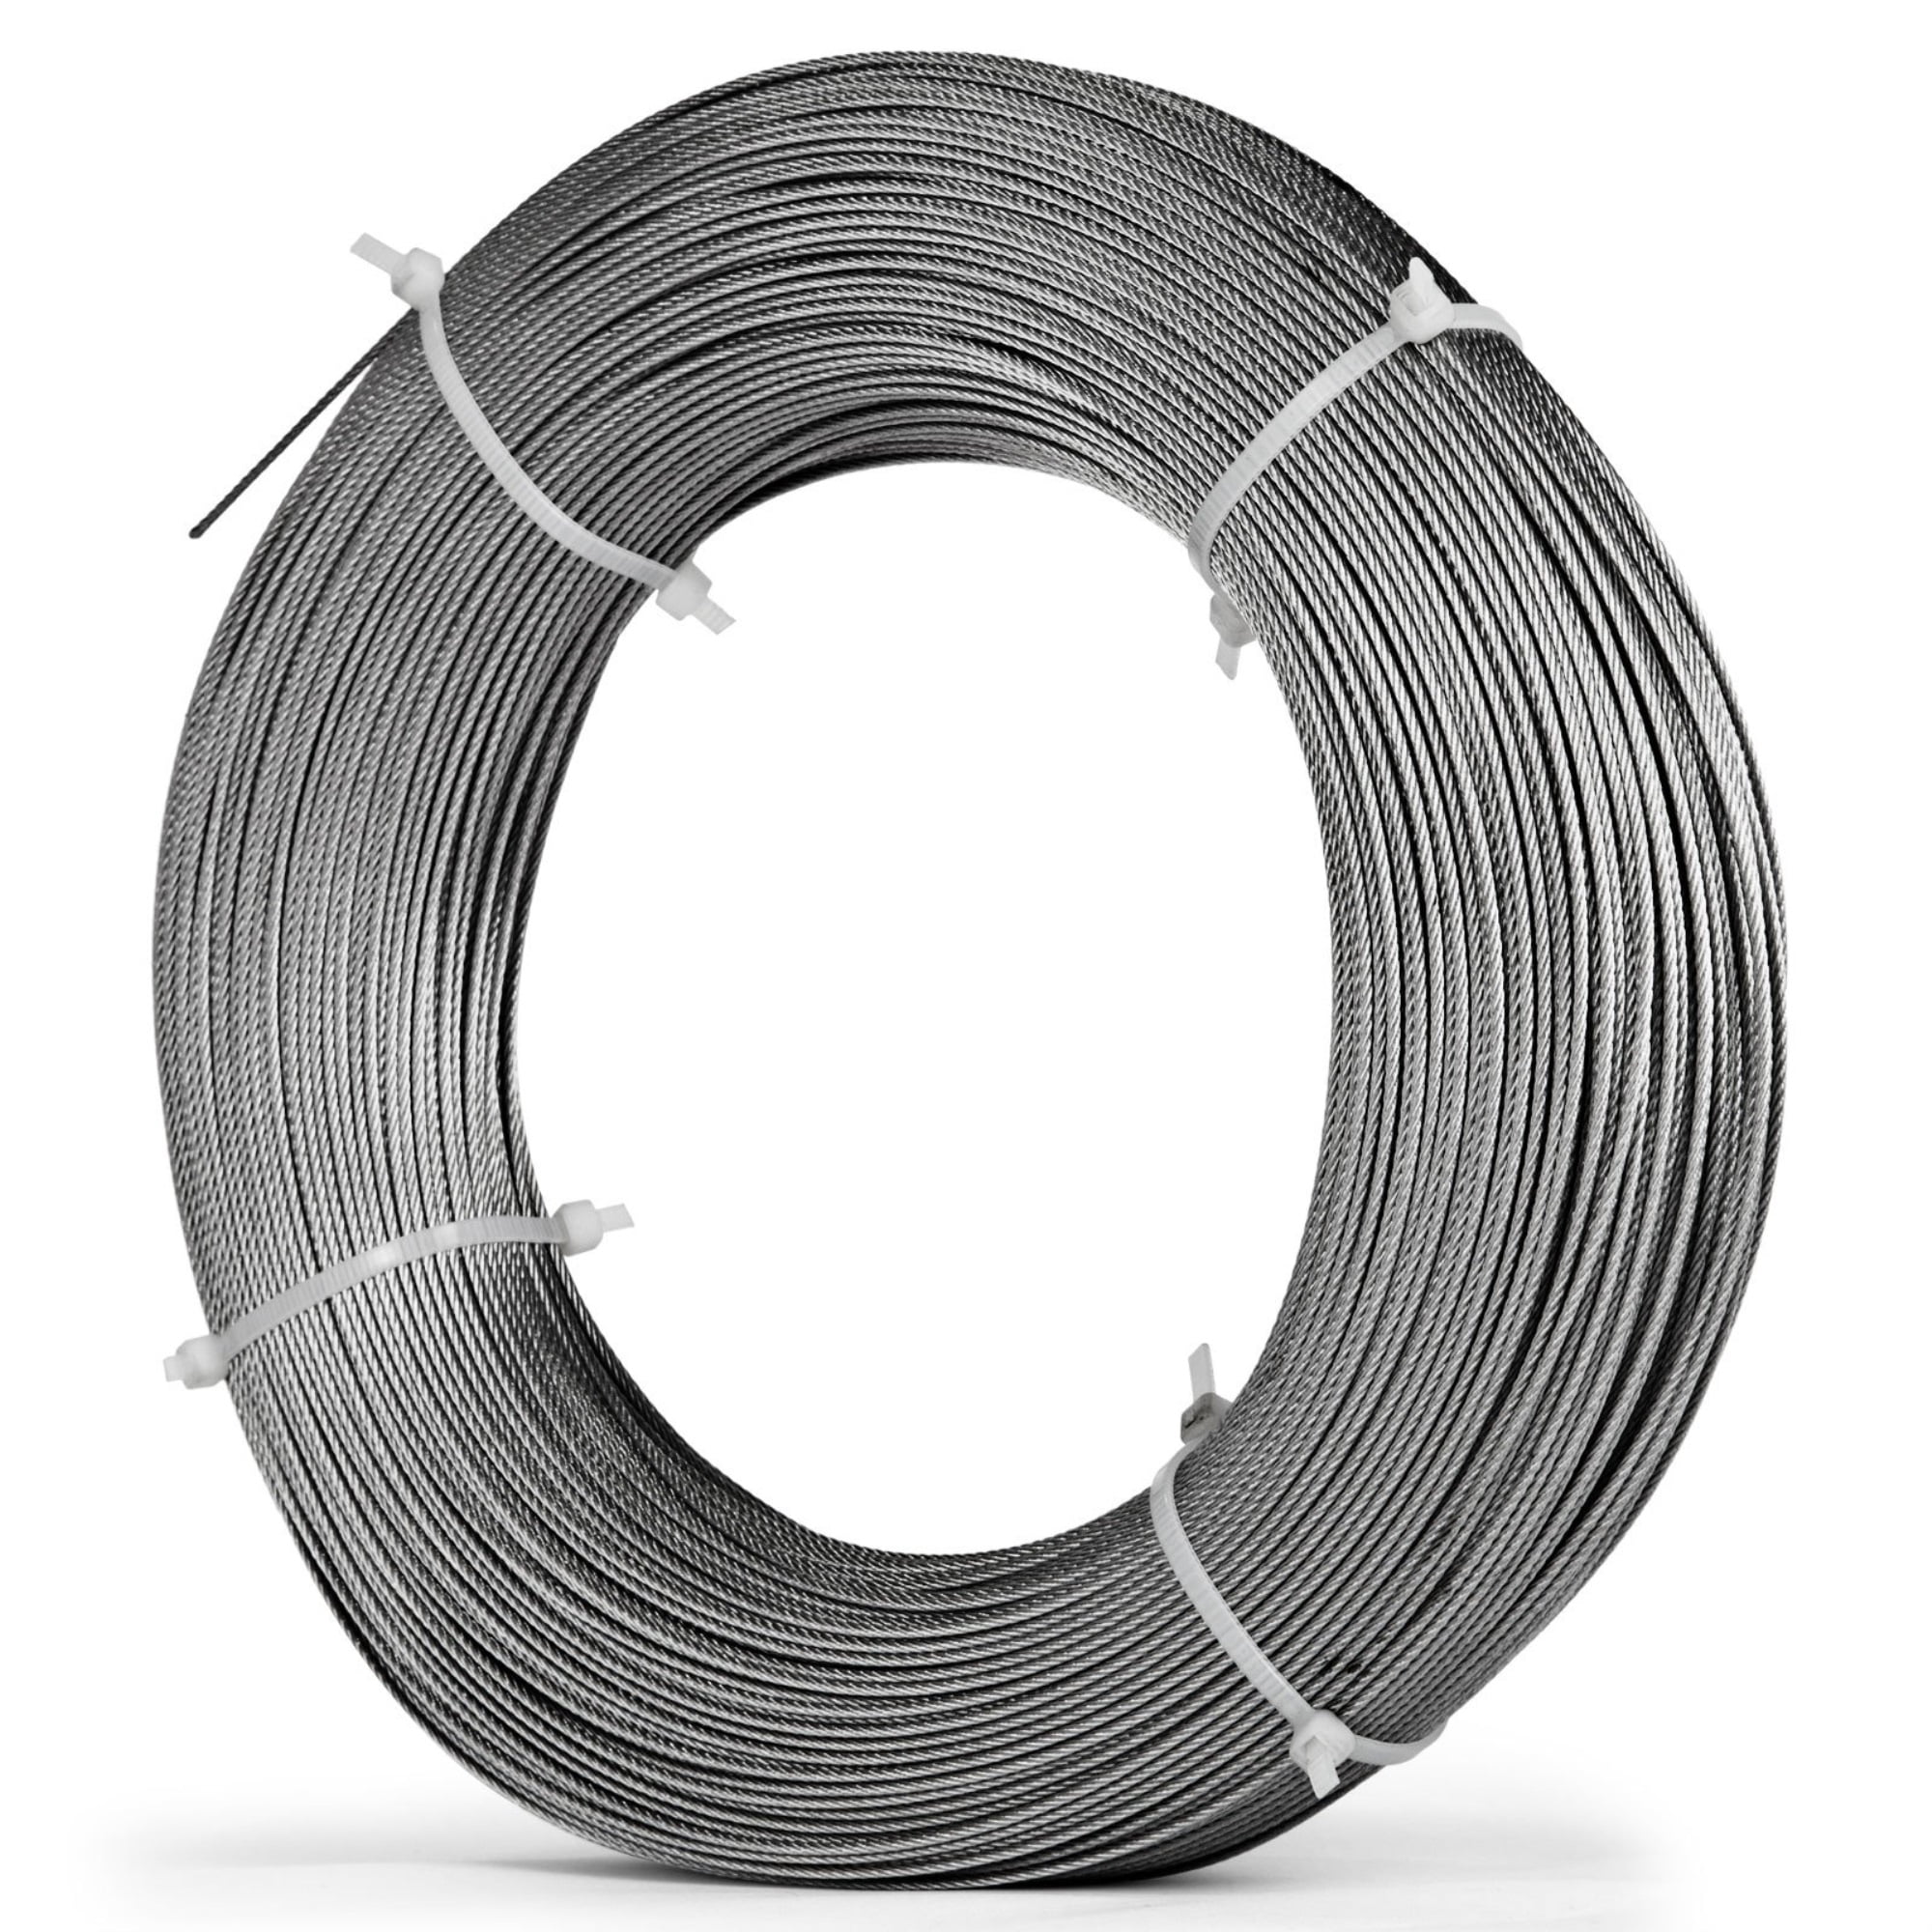 T304 Stainless Steel Cable Wire Rope Cable,1/8",7x7 Lifting Aircraft Machinery 